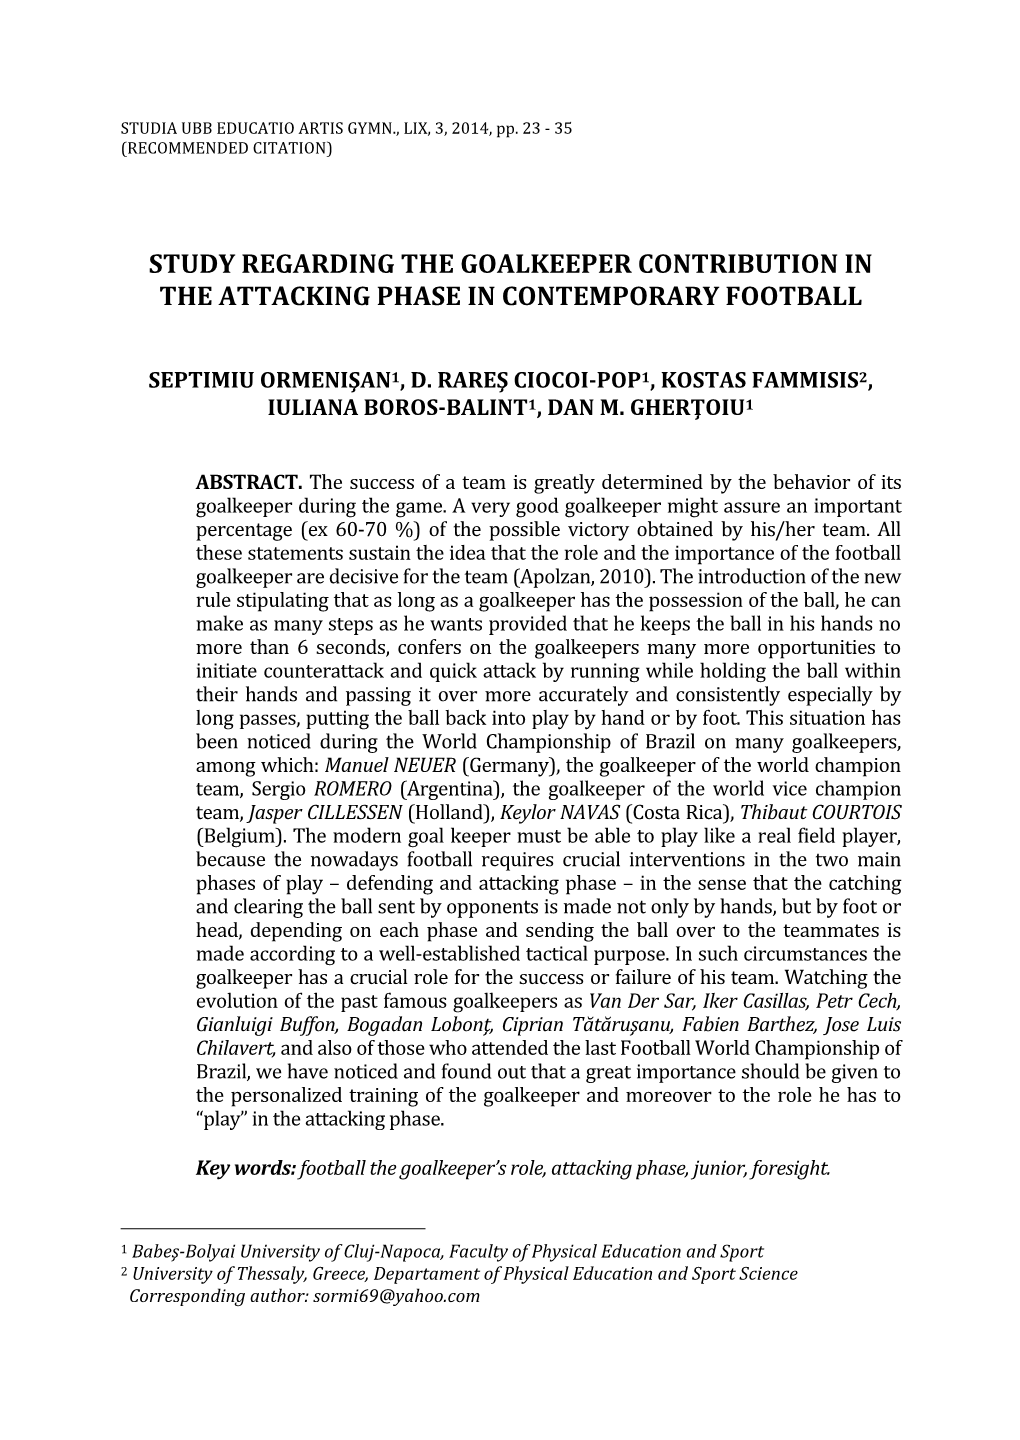 Study Regarding the Goalkeeper Contribution in the Attacking Phase in Contemporary Football